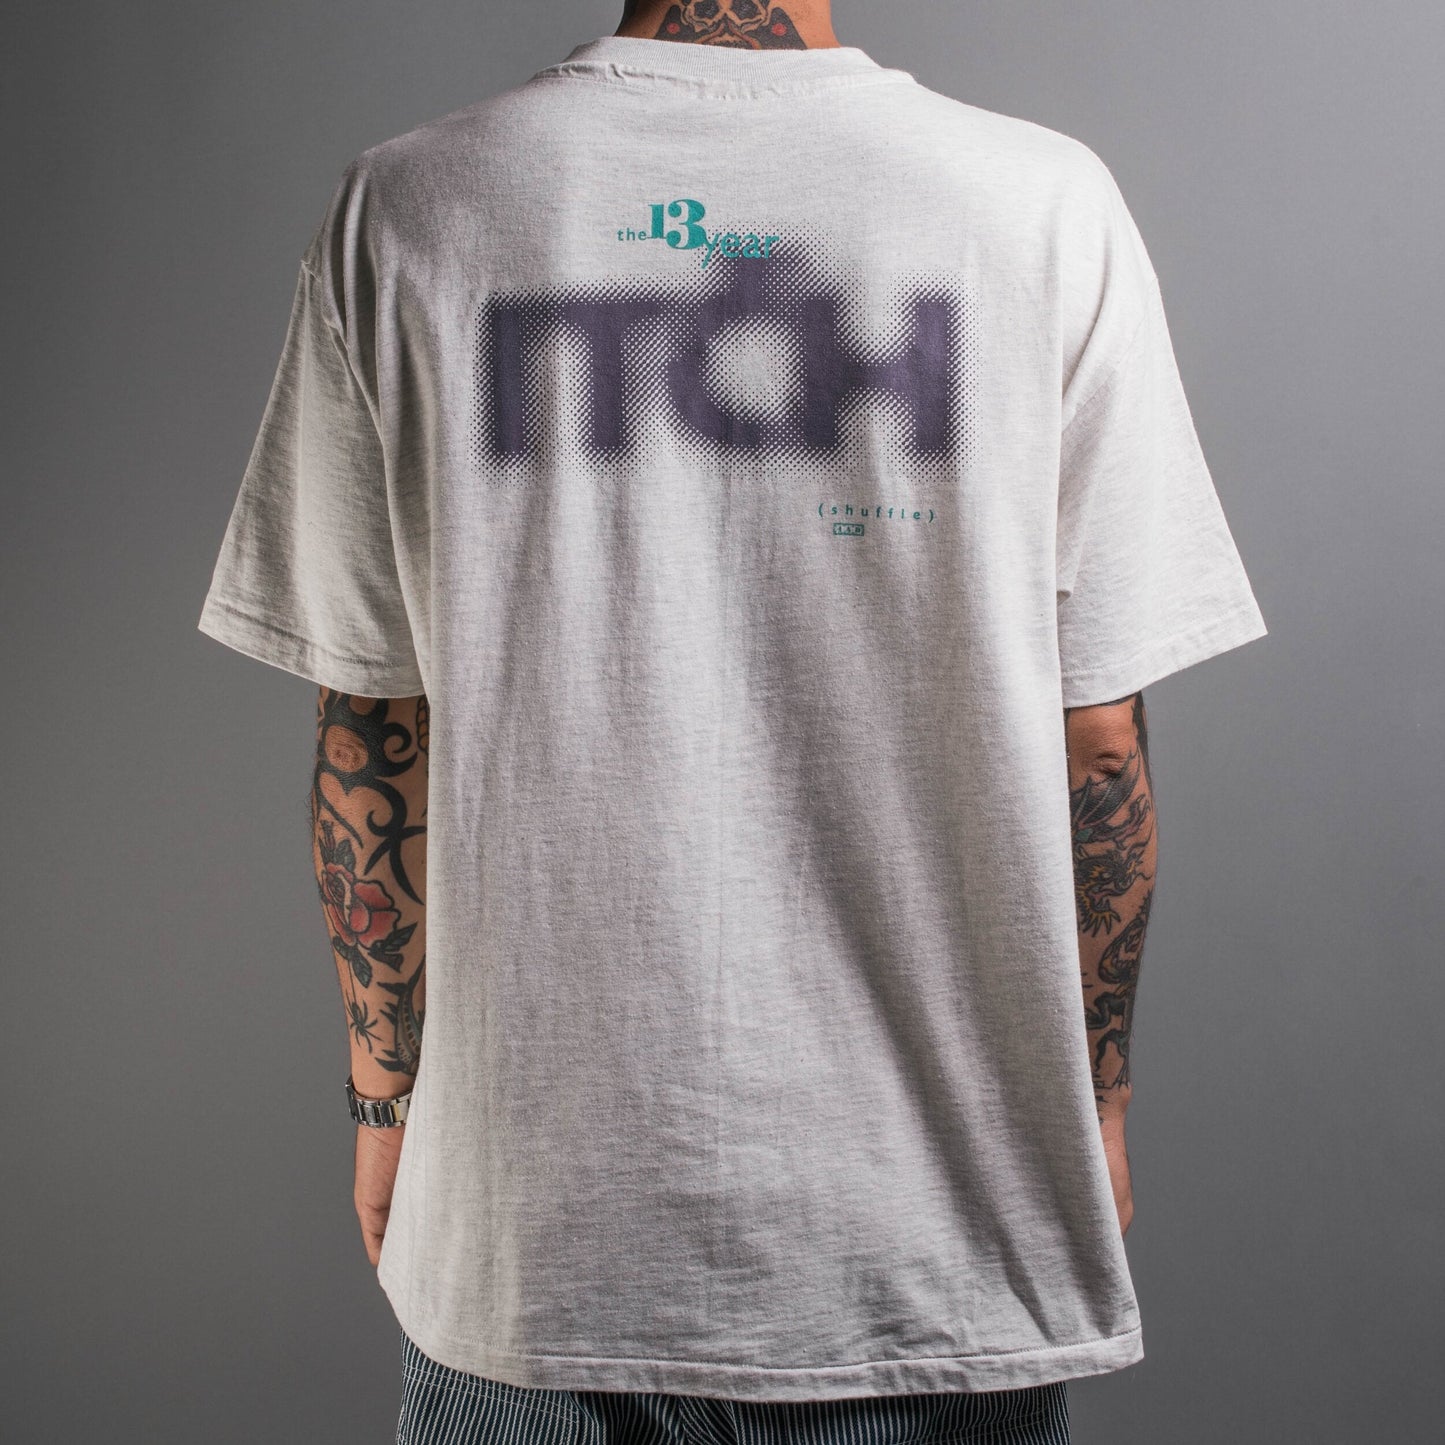 Vintage 1993 4AD The 13 Year Itch Compilation T-Shirt